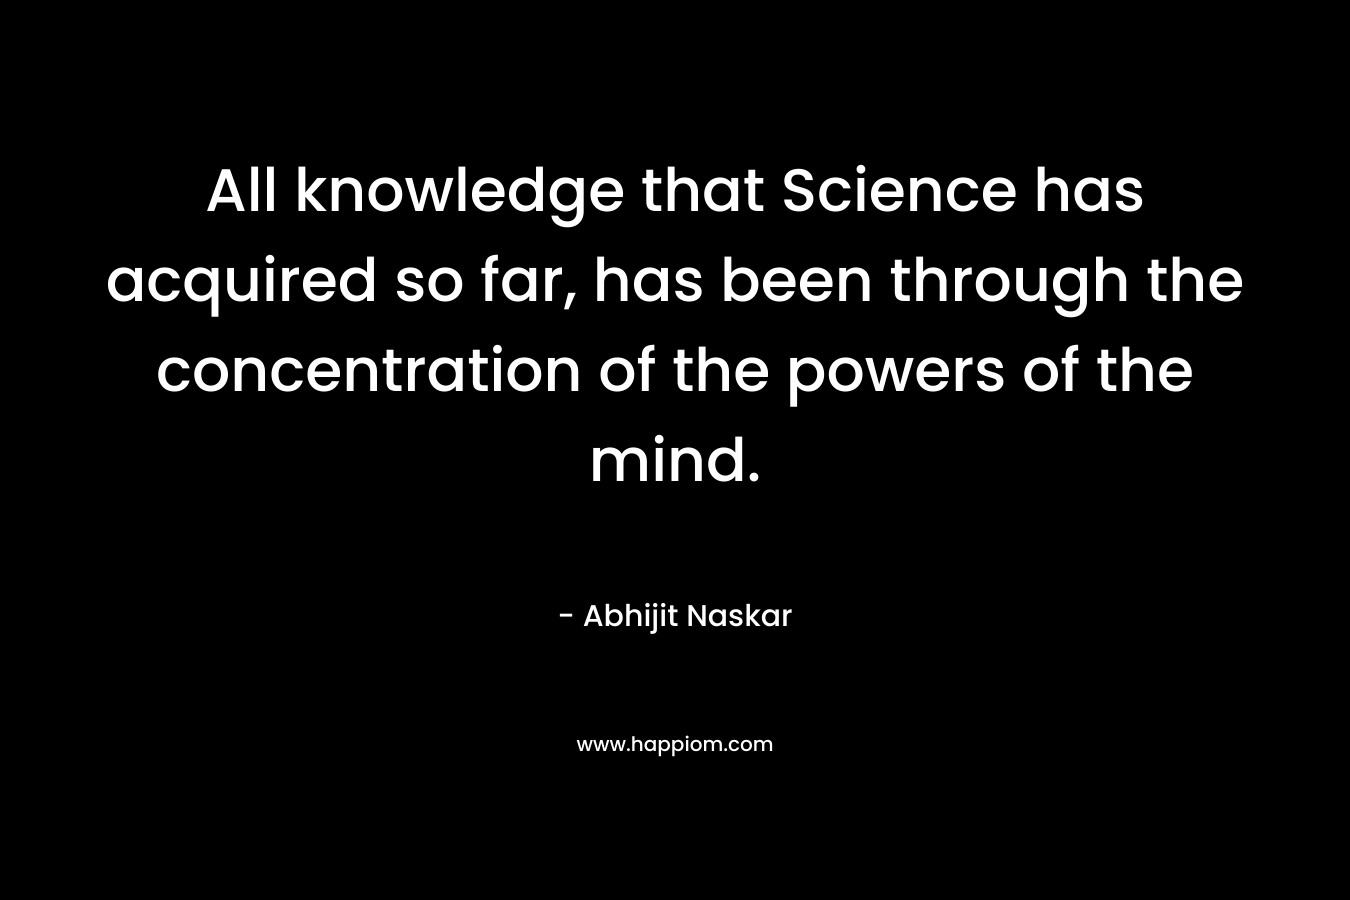 All knowledge that Science has acquired so far, has been through the concentration of the powers of the mind.